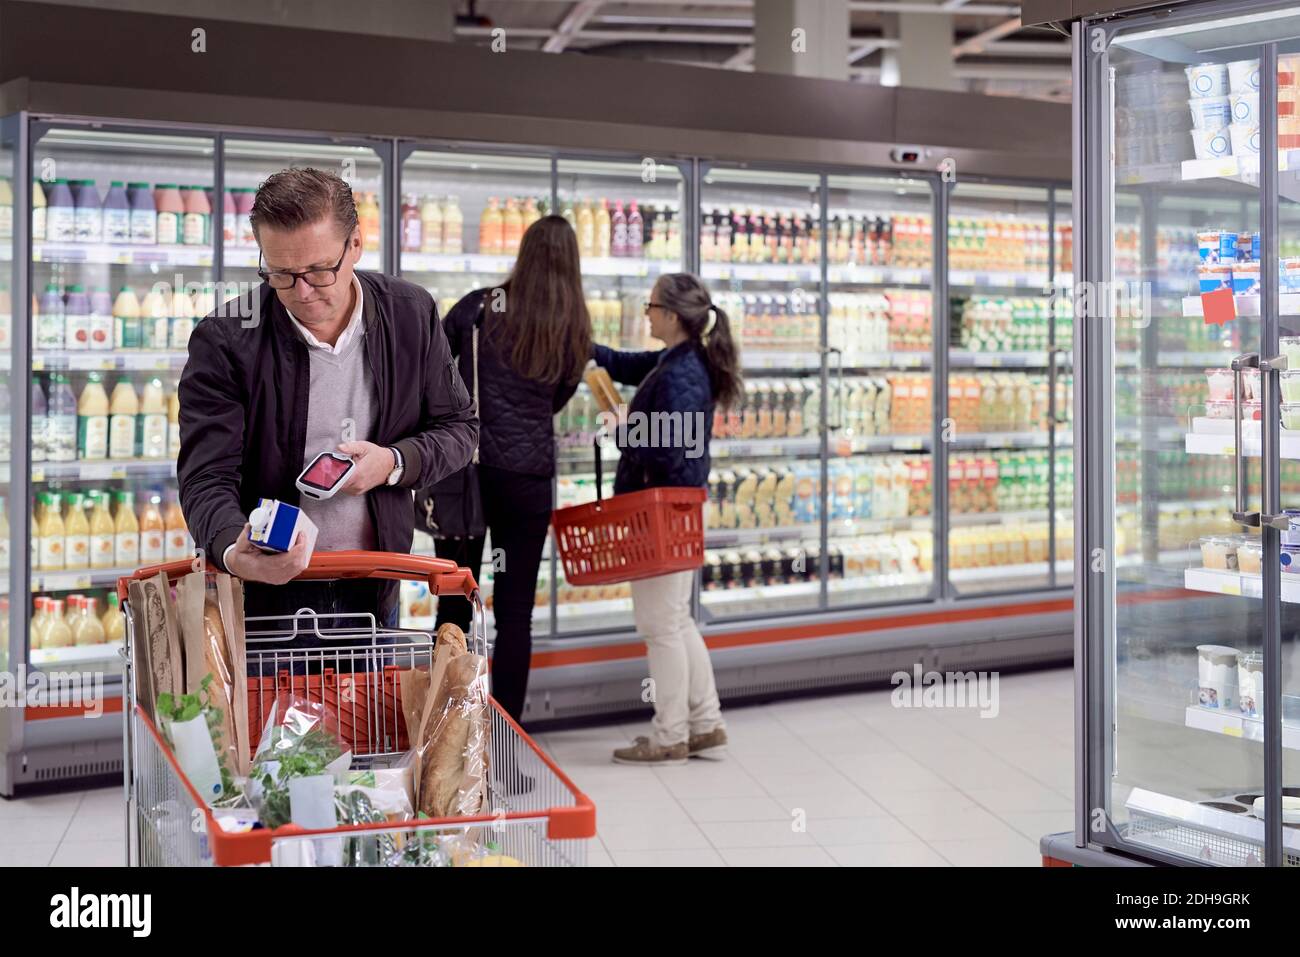 Mature man scanning juice box with reader against women buying at refrigerated section in supermarket Stock Photo